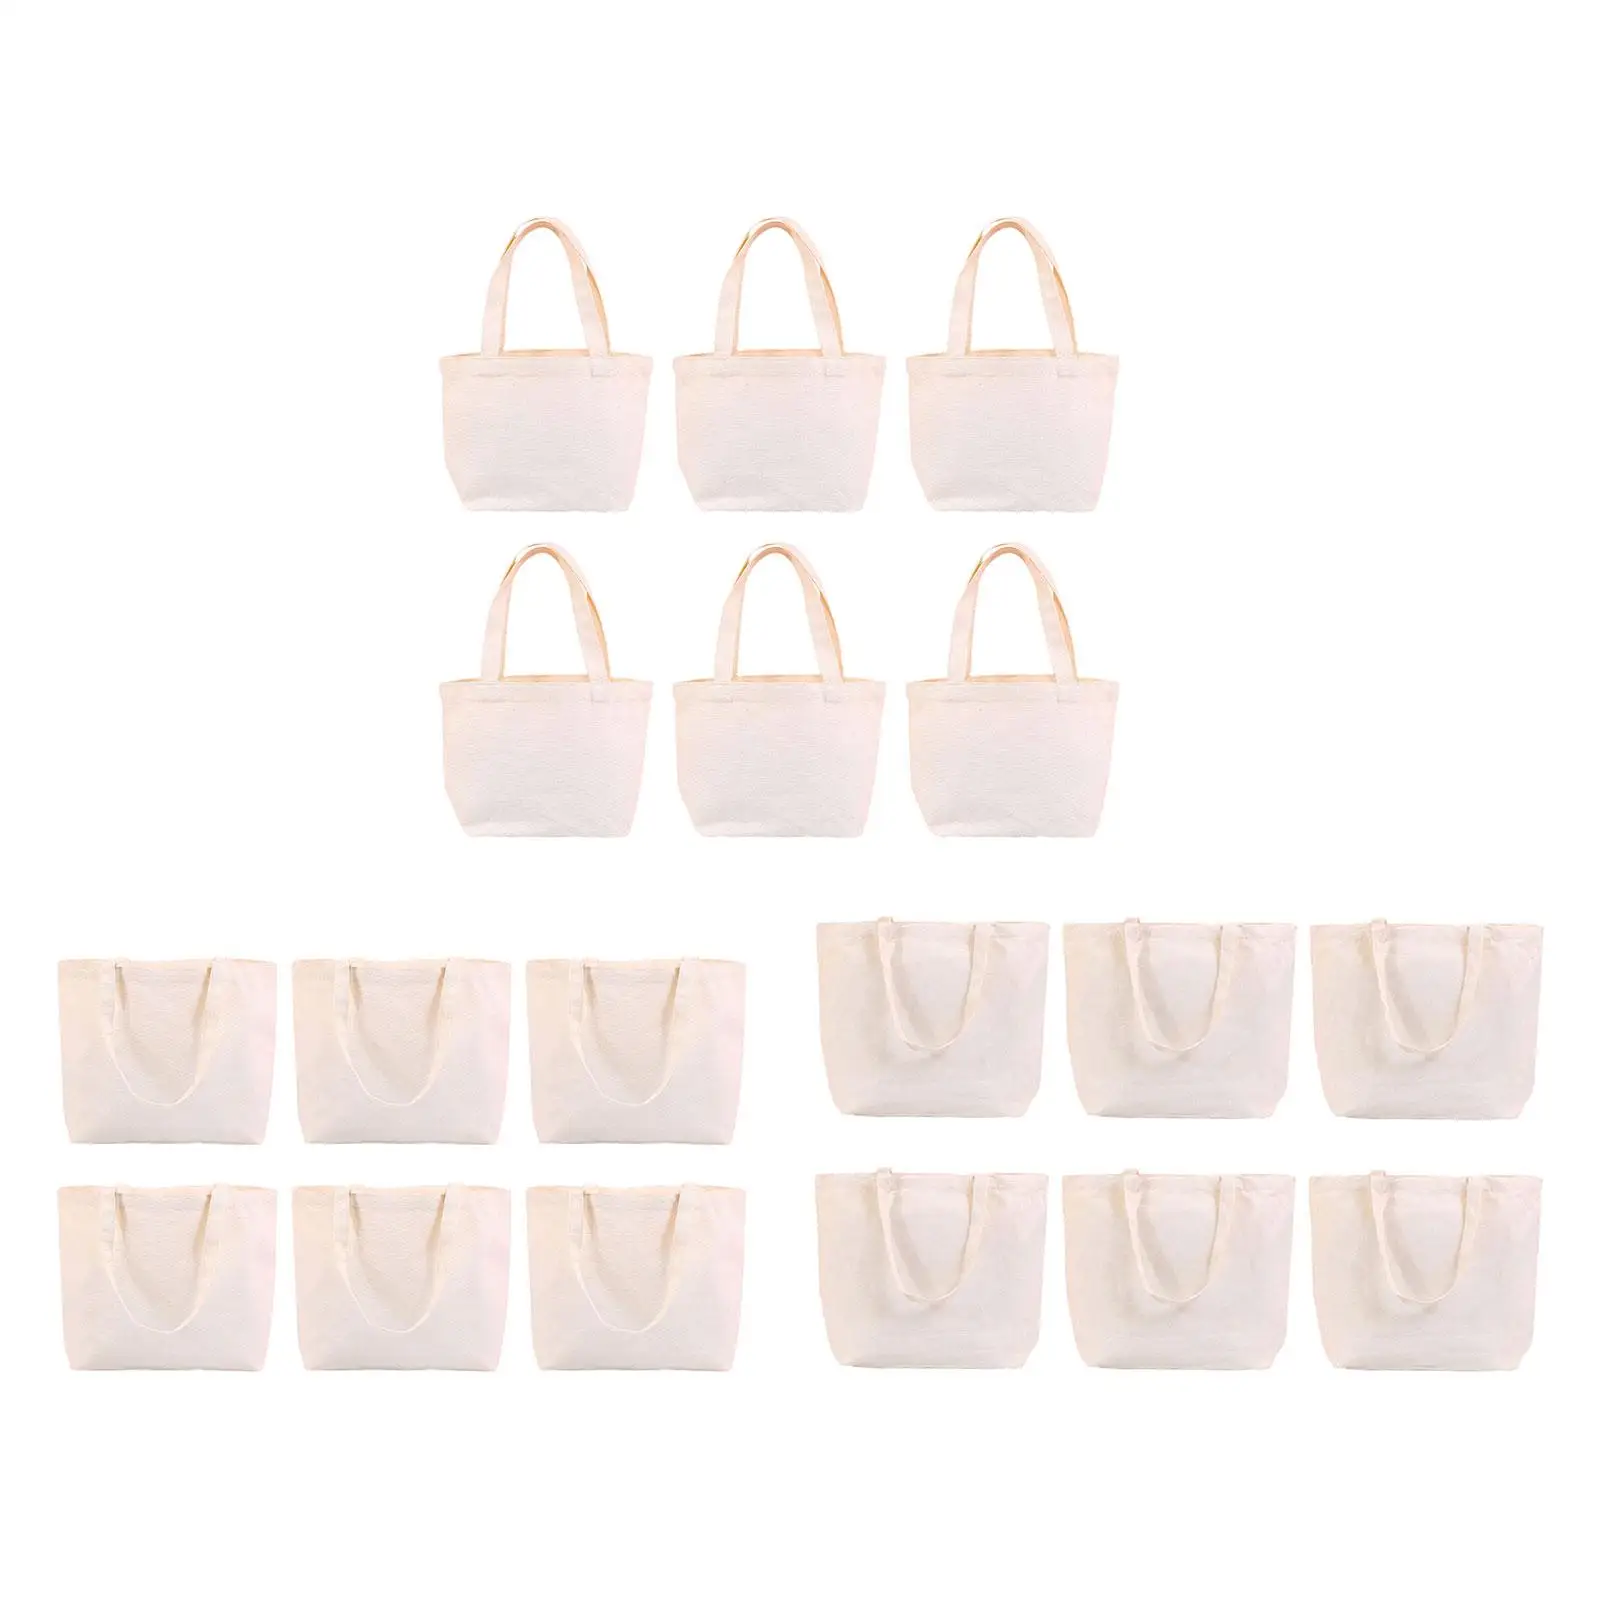 6Pcs Canvas Tote Bags Washable Top Handle Canvas Fabric Bags for Painting Printing Embroidery Decoration DIY Crafts Advertising